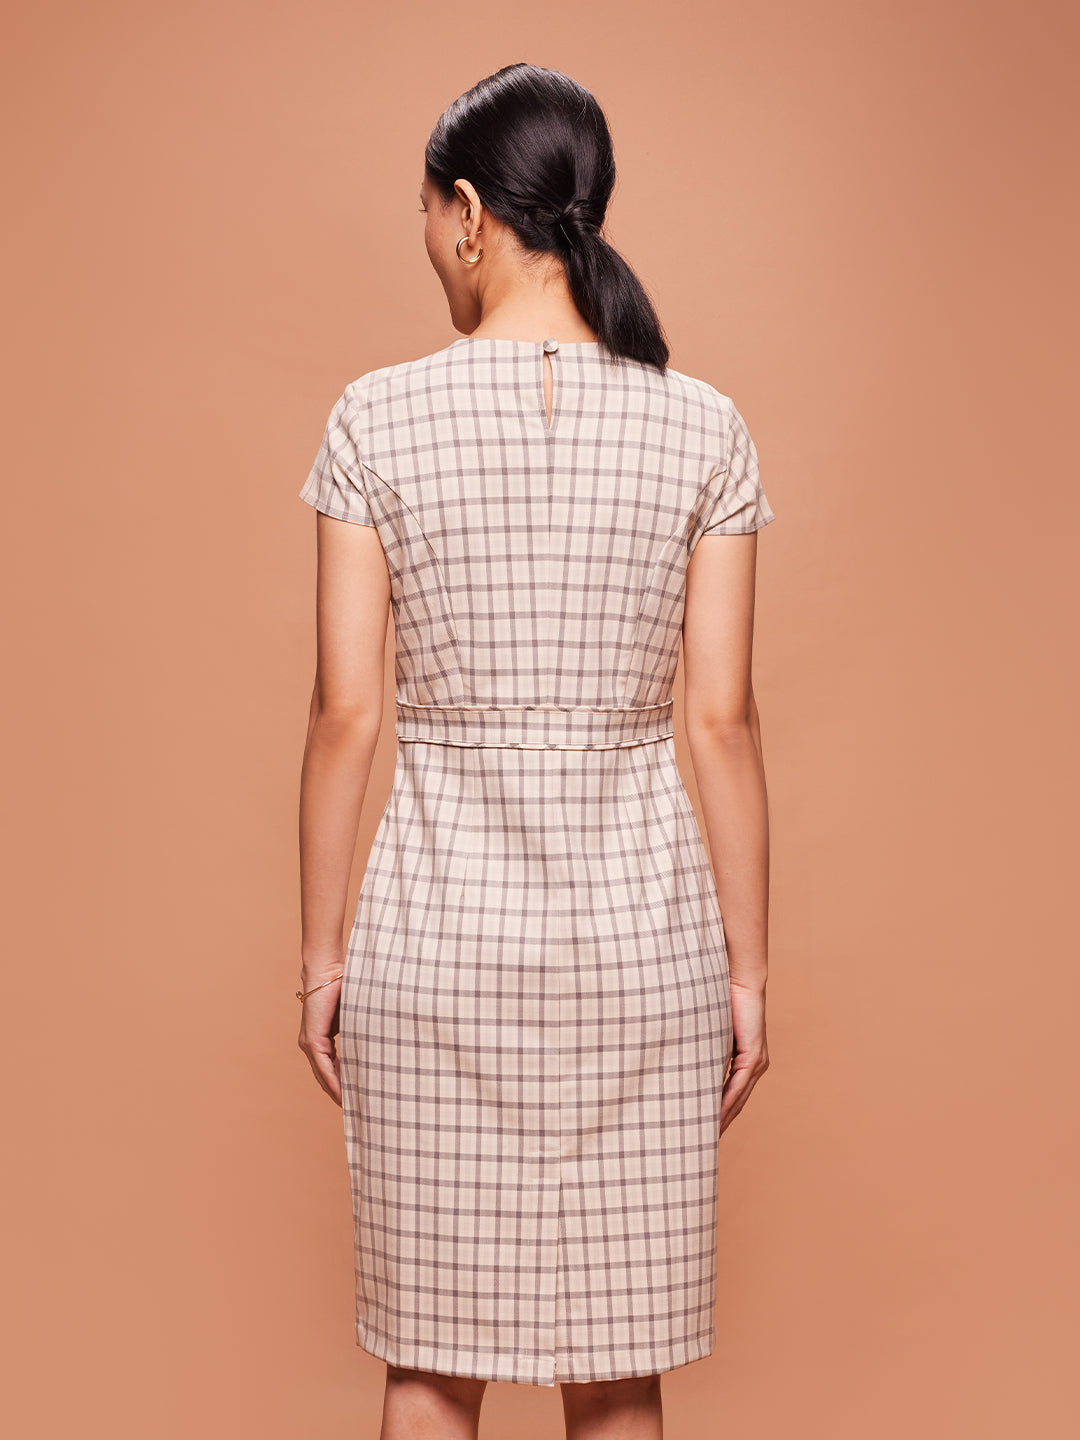 Bombay High Women's Chequered Beige Fitted Dress